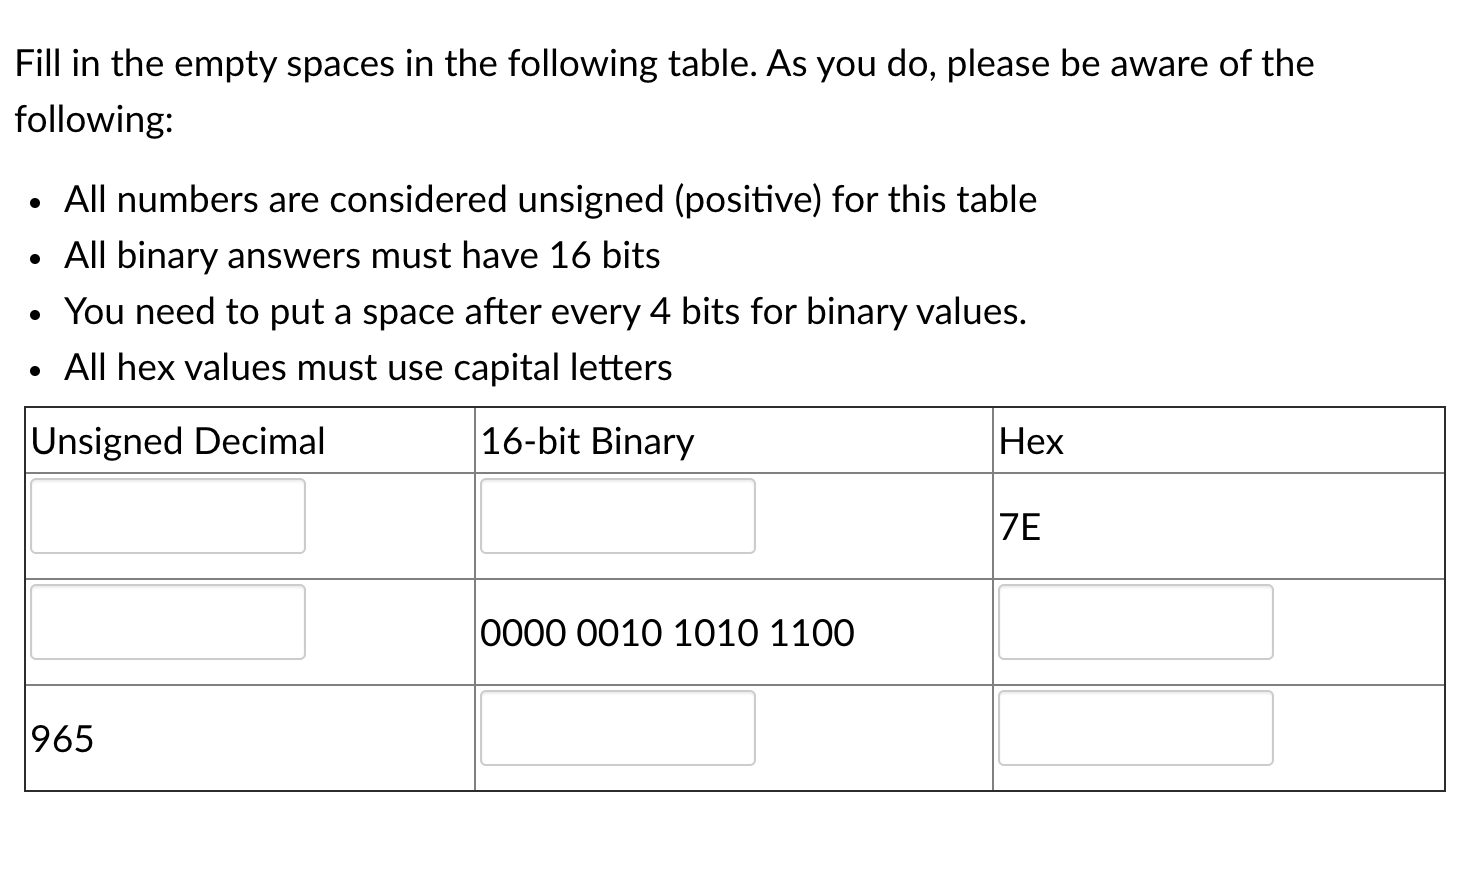 Fill in the empty spaces in the following table. As you do, please be aware of the
following:
• All numbers are considered unsigned (positive) for this table
• All binary answers must have 16 bits
• You need to put a space after every 4 bits for binary values.
• All hex values must use capital letters
Unsigned Decimal
16-bit Binary
Нех
7E
0000 0010 1010 1100
965
